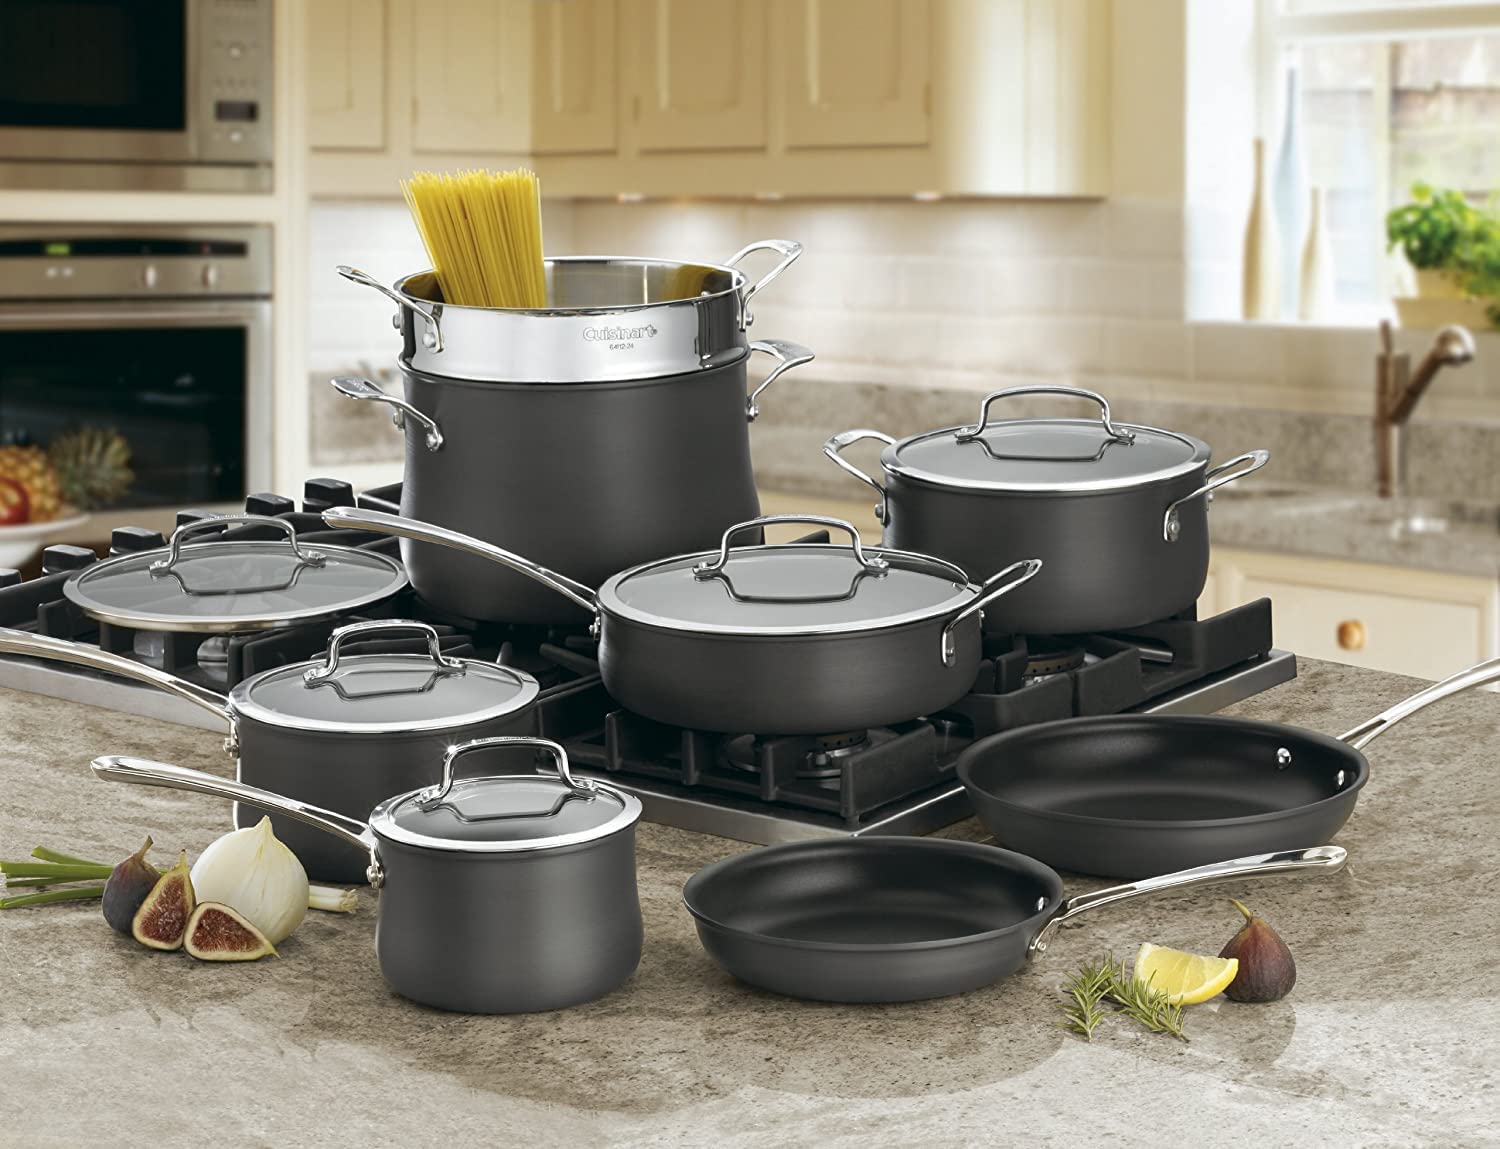 buying non-stick cookware